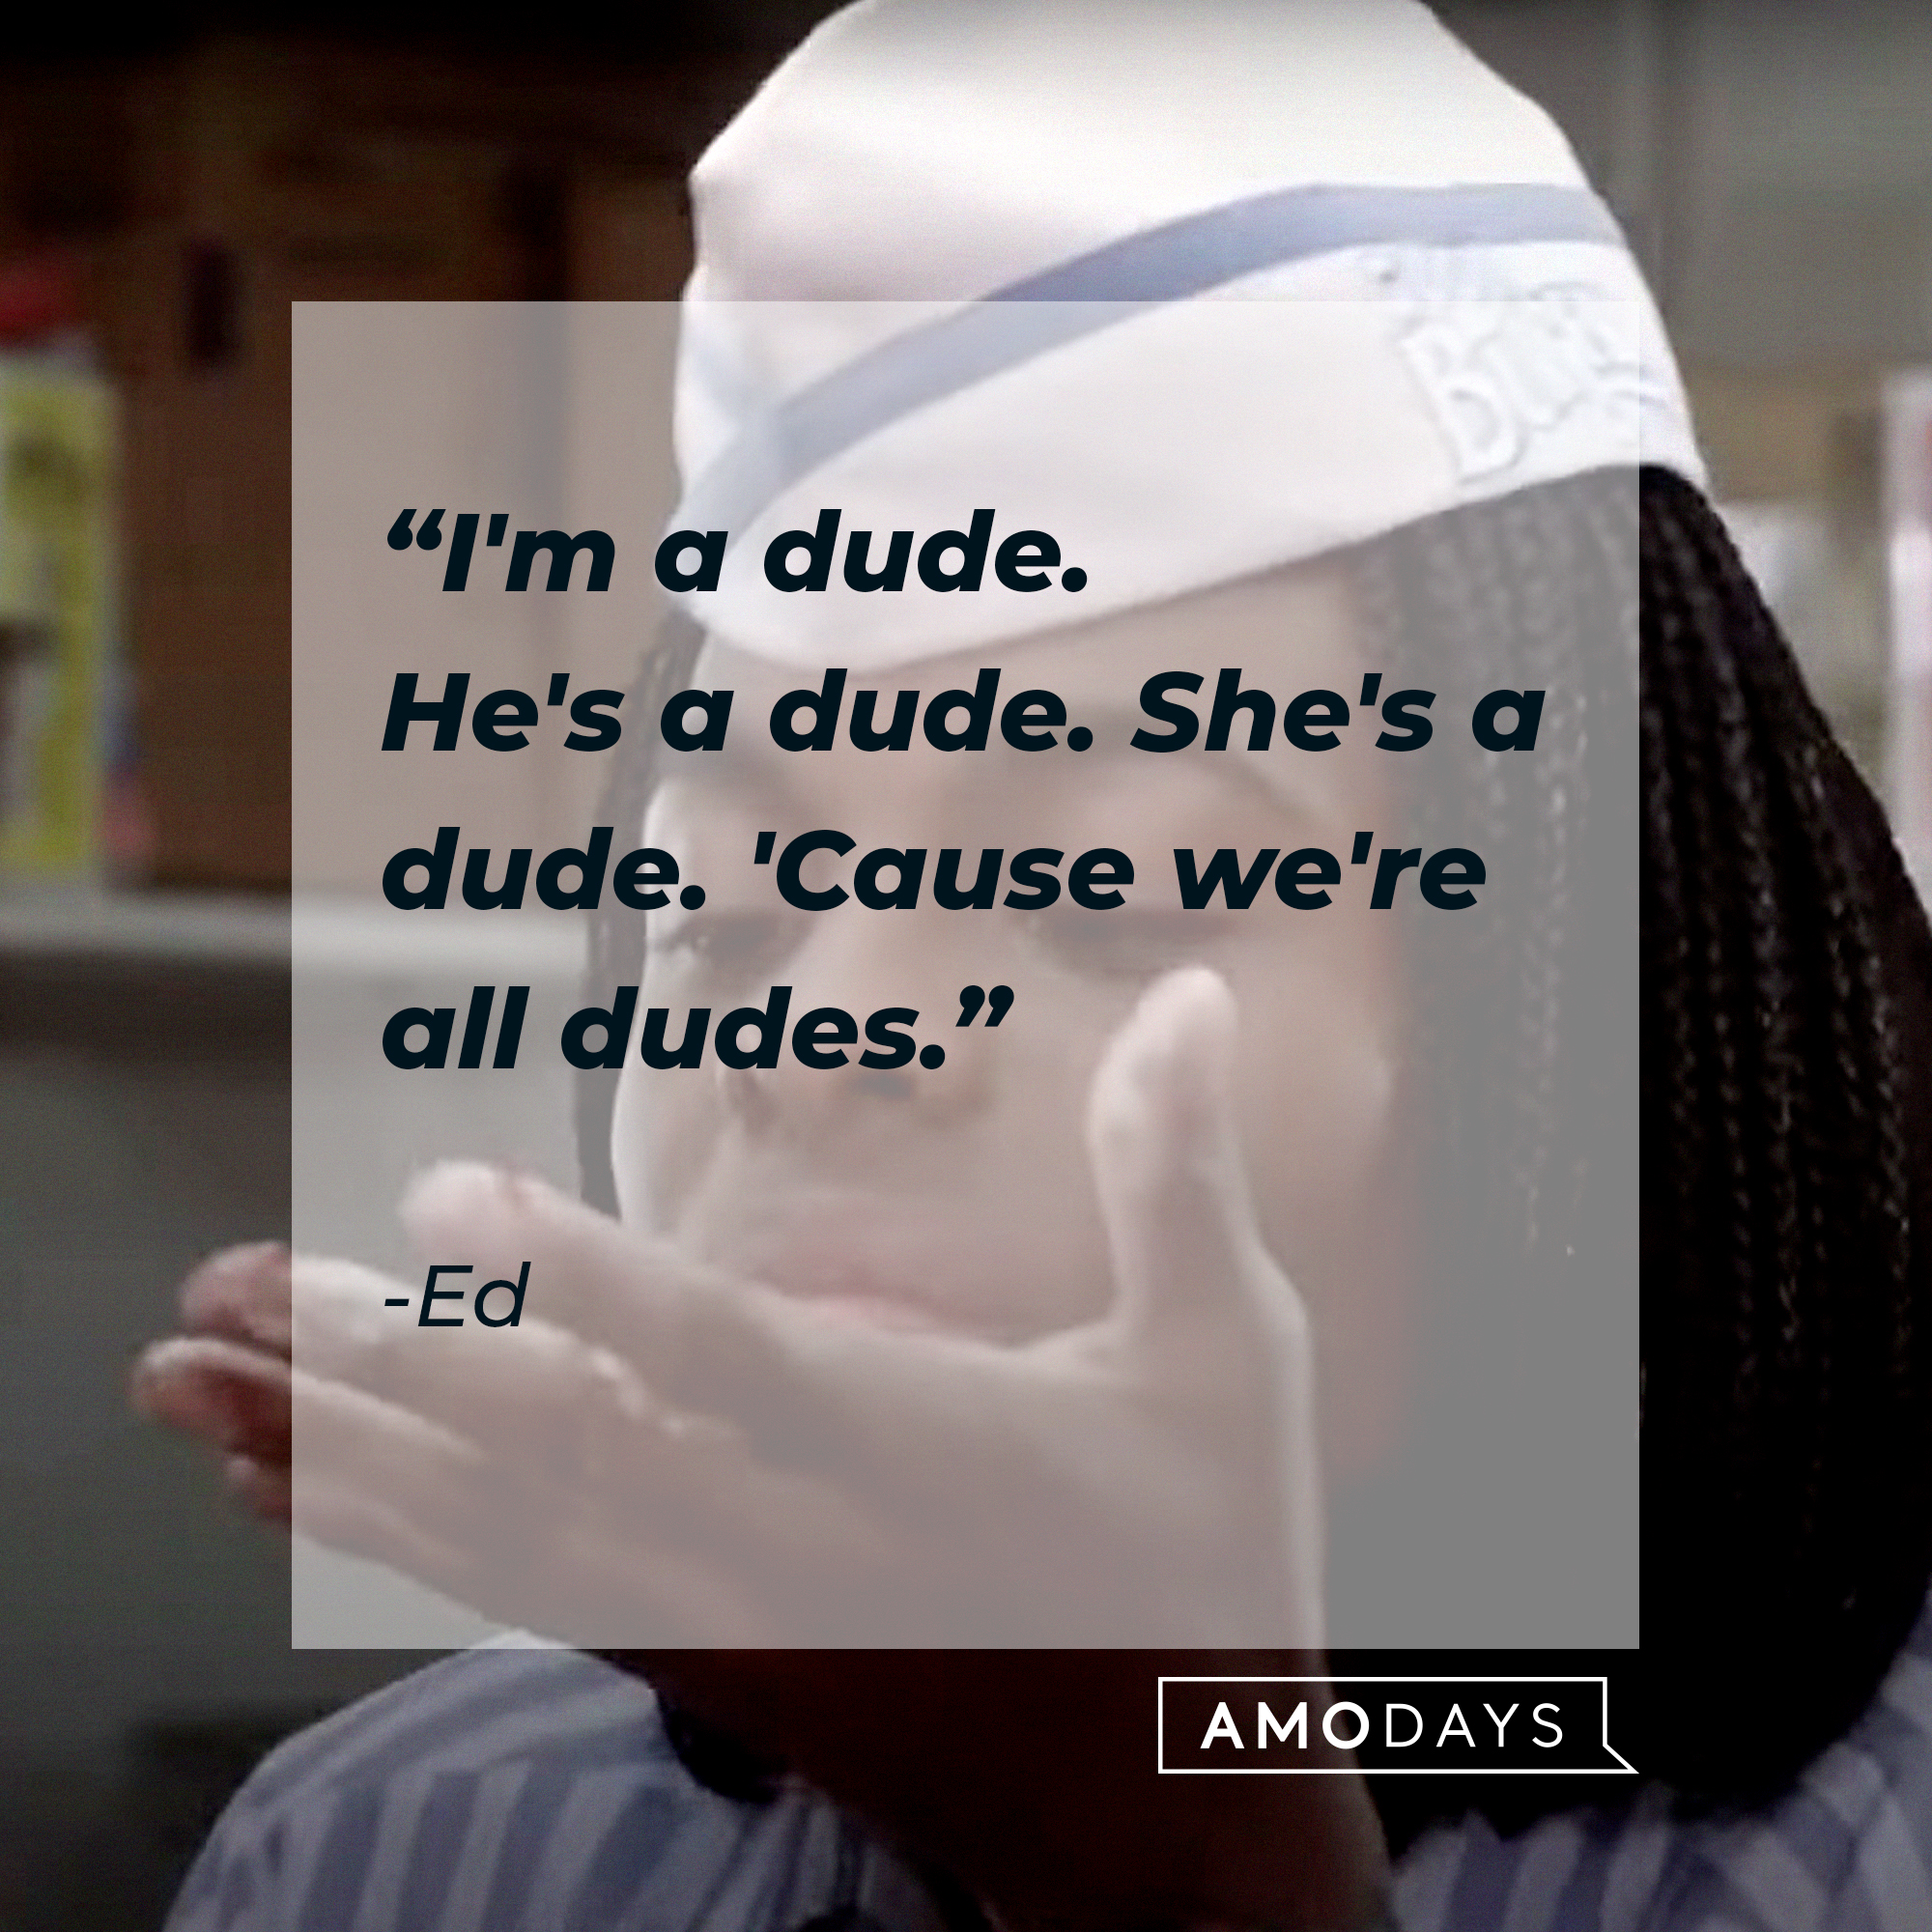 An image of Ed with his quote: “I'm a dude. He's a dude. She's a dude. 'Cause we're all dudes.” | Source: AmoDays